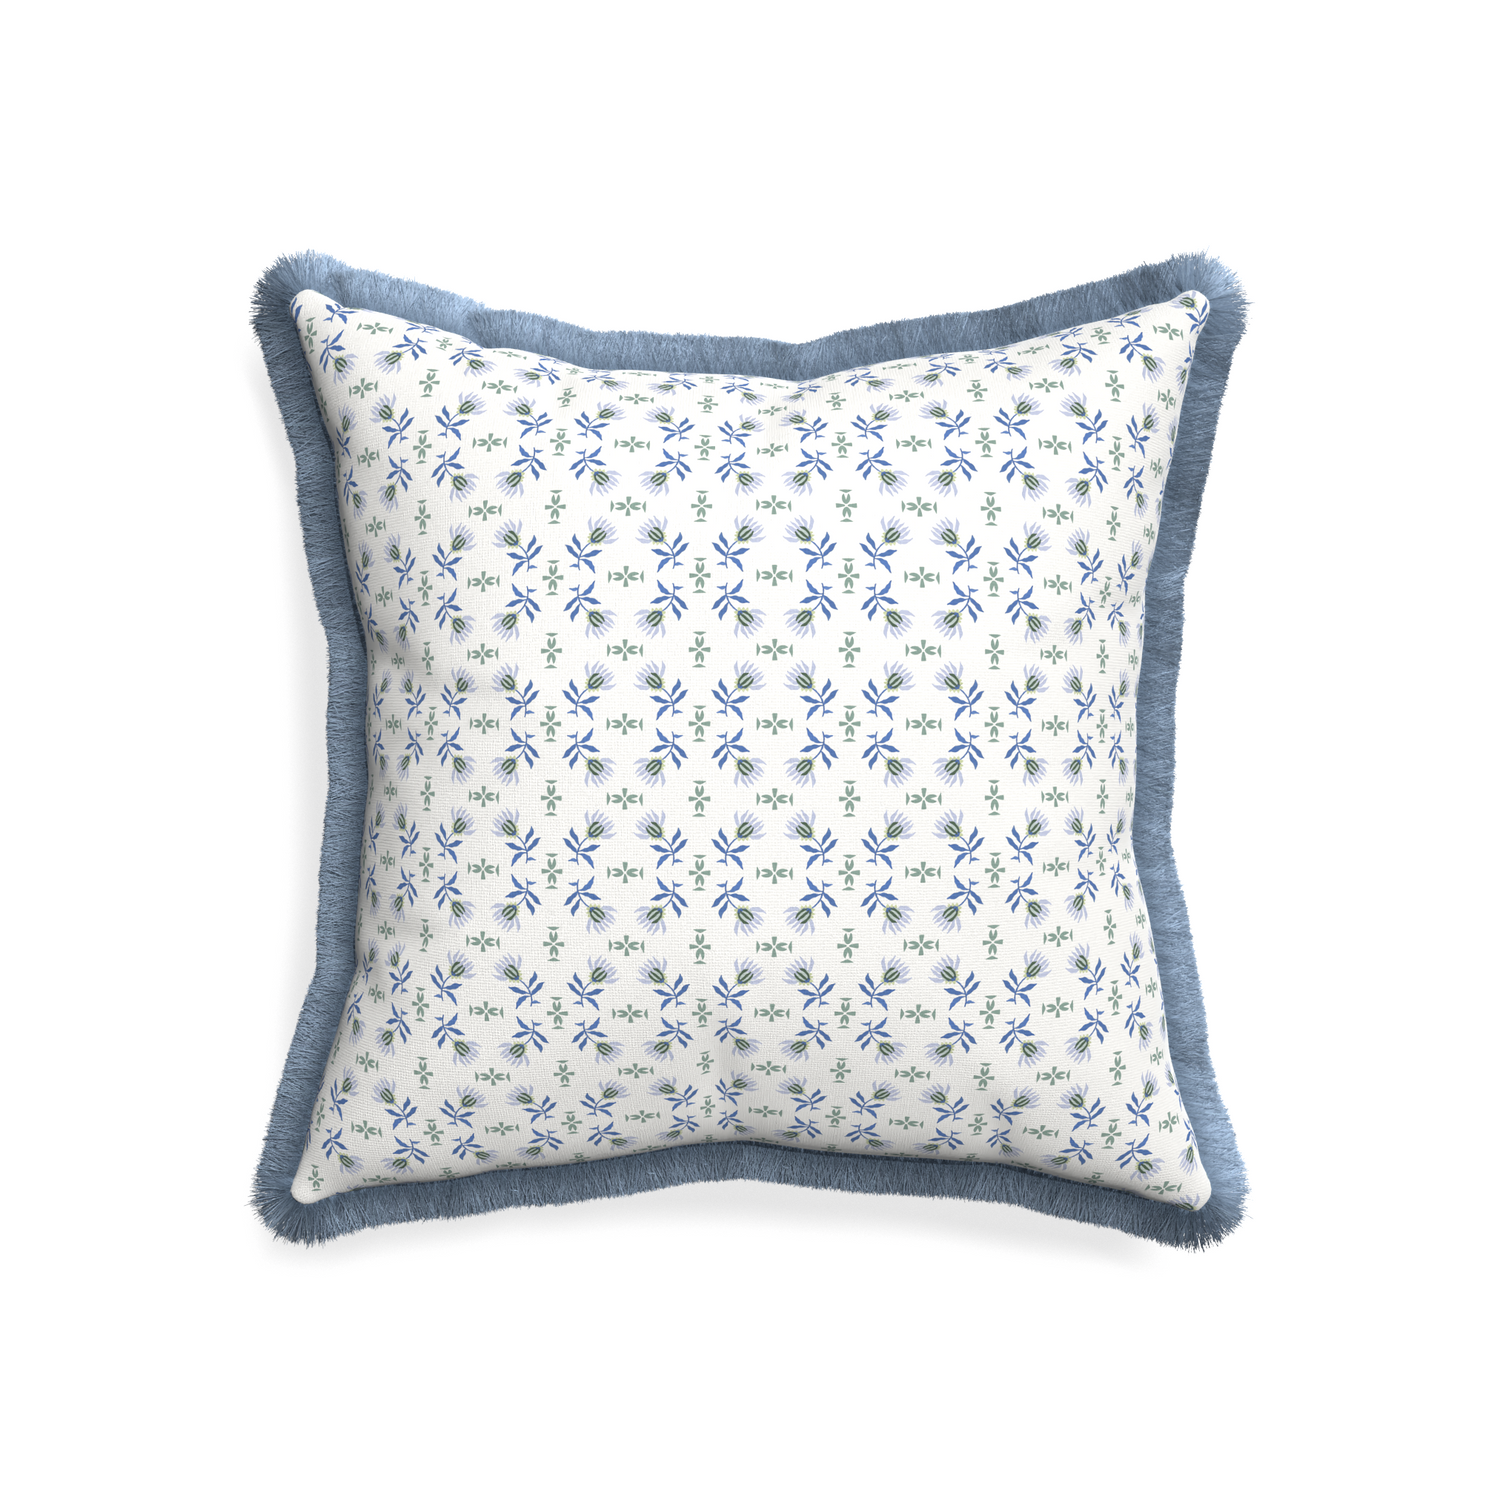 20-square lee custom pillow with sky fringe on white background